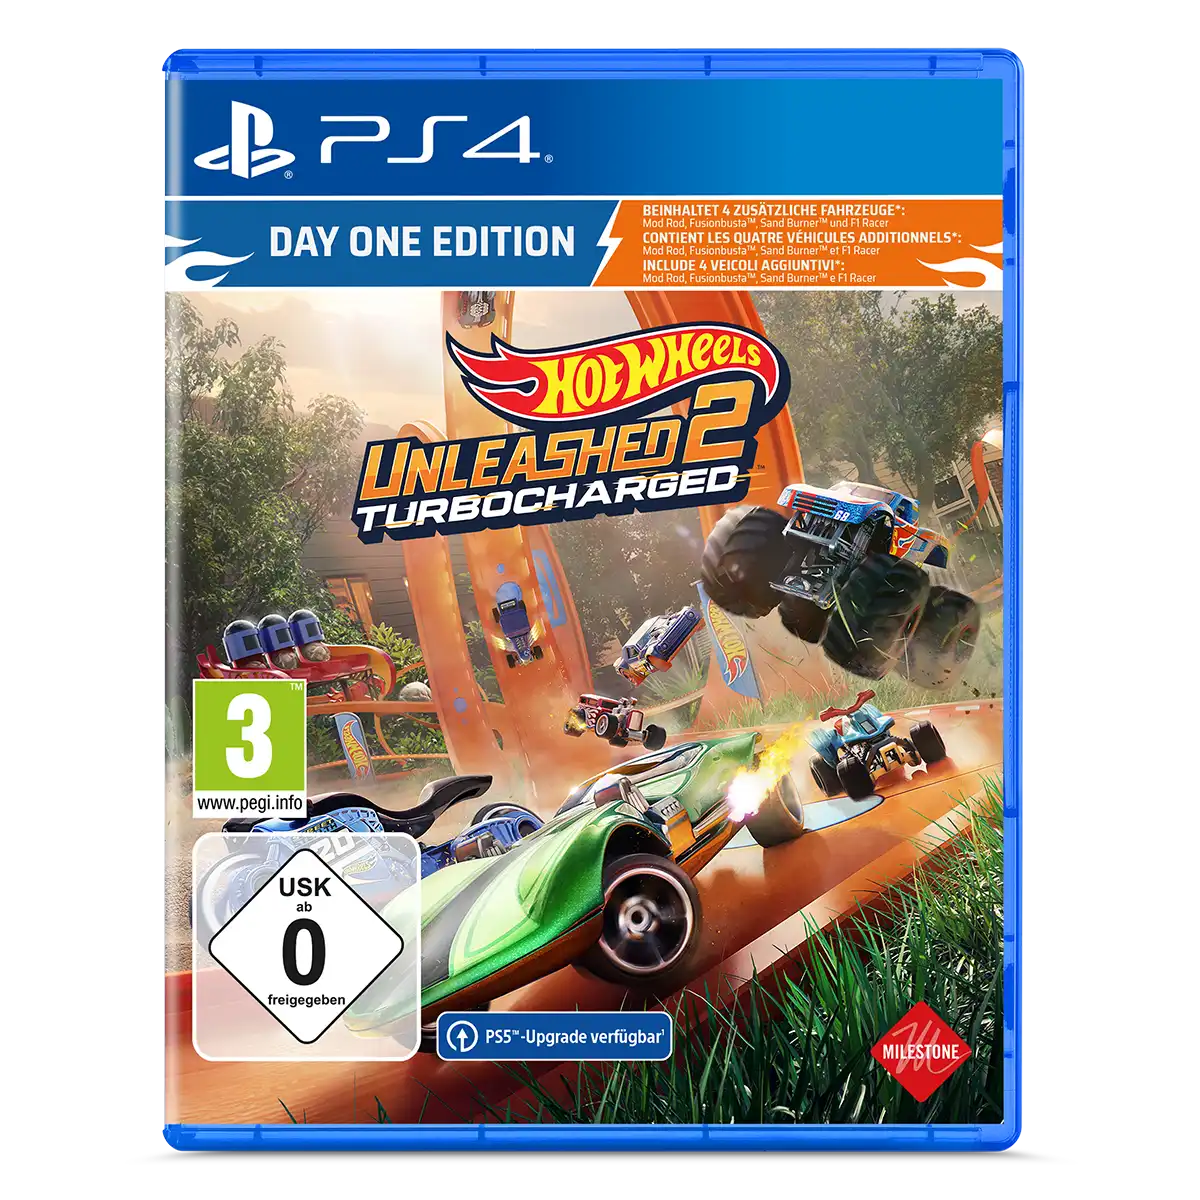 Hot Wheels Unleashed™ 2 Turbocharged Day One Edition (PS4) Cover